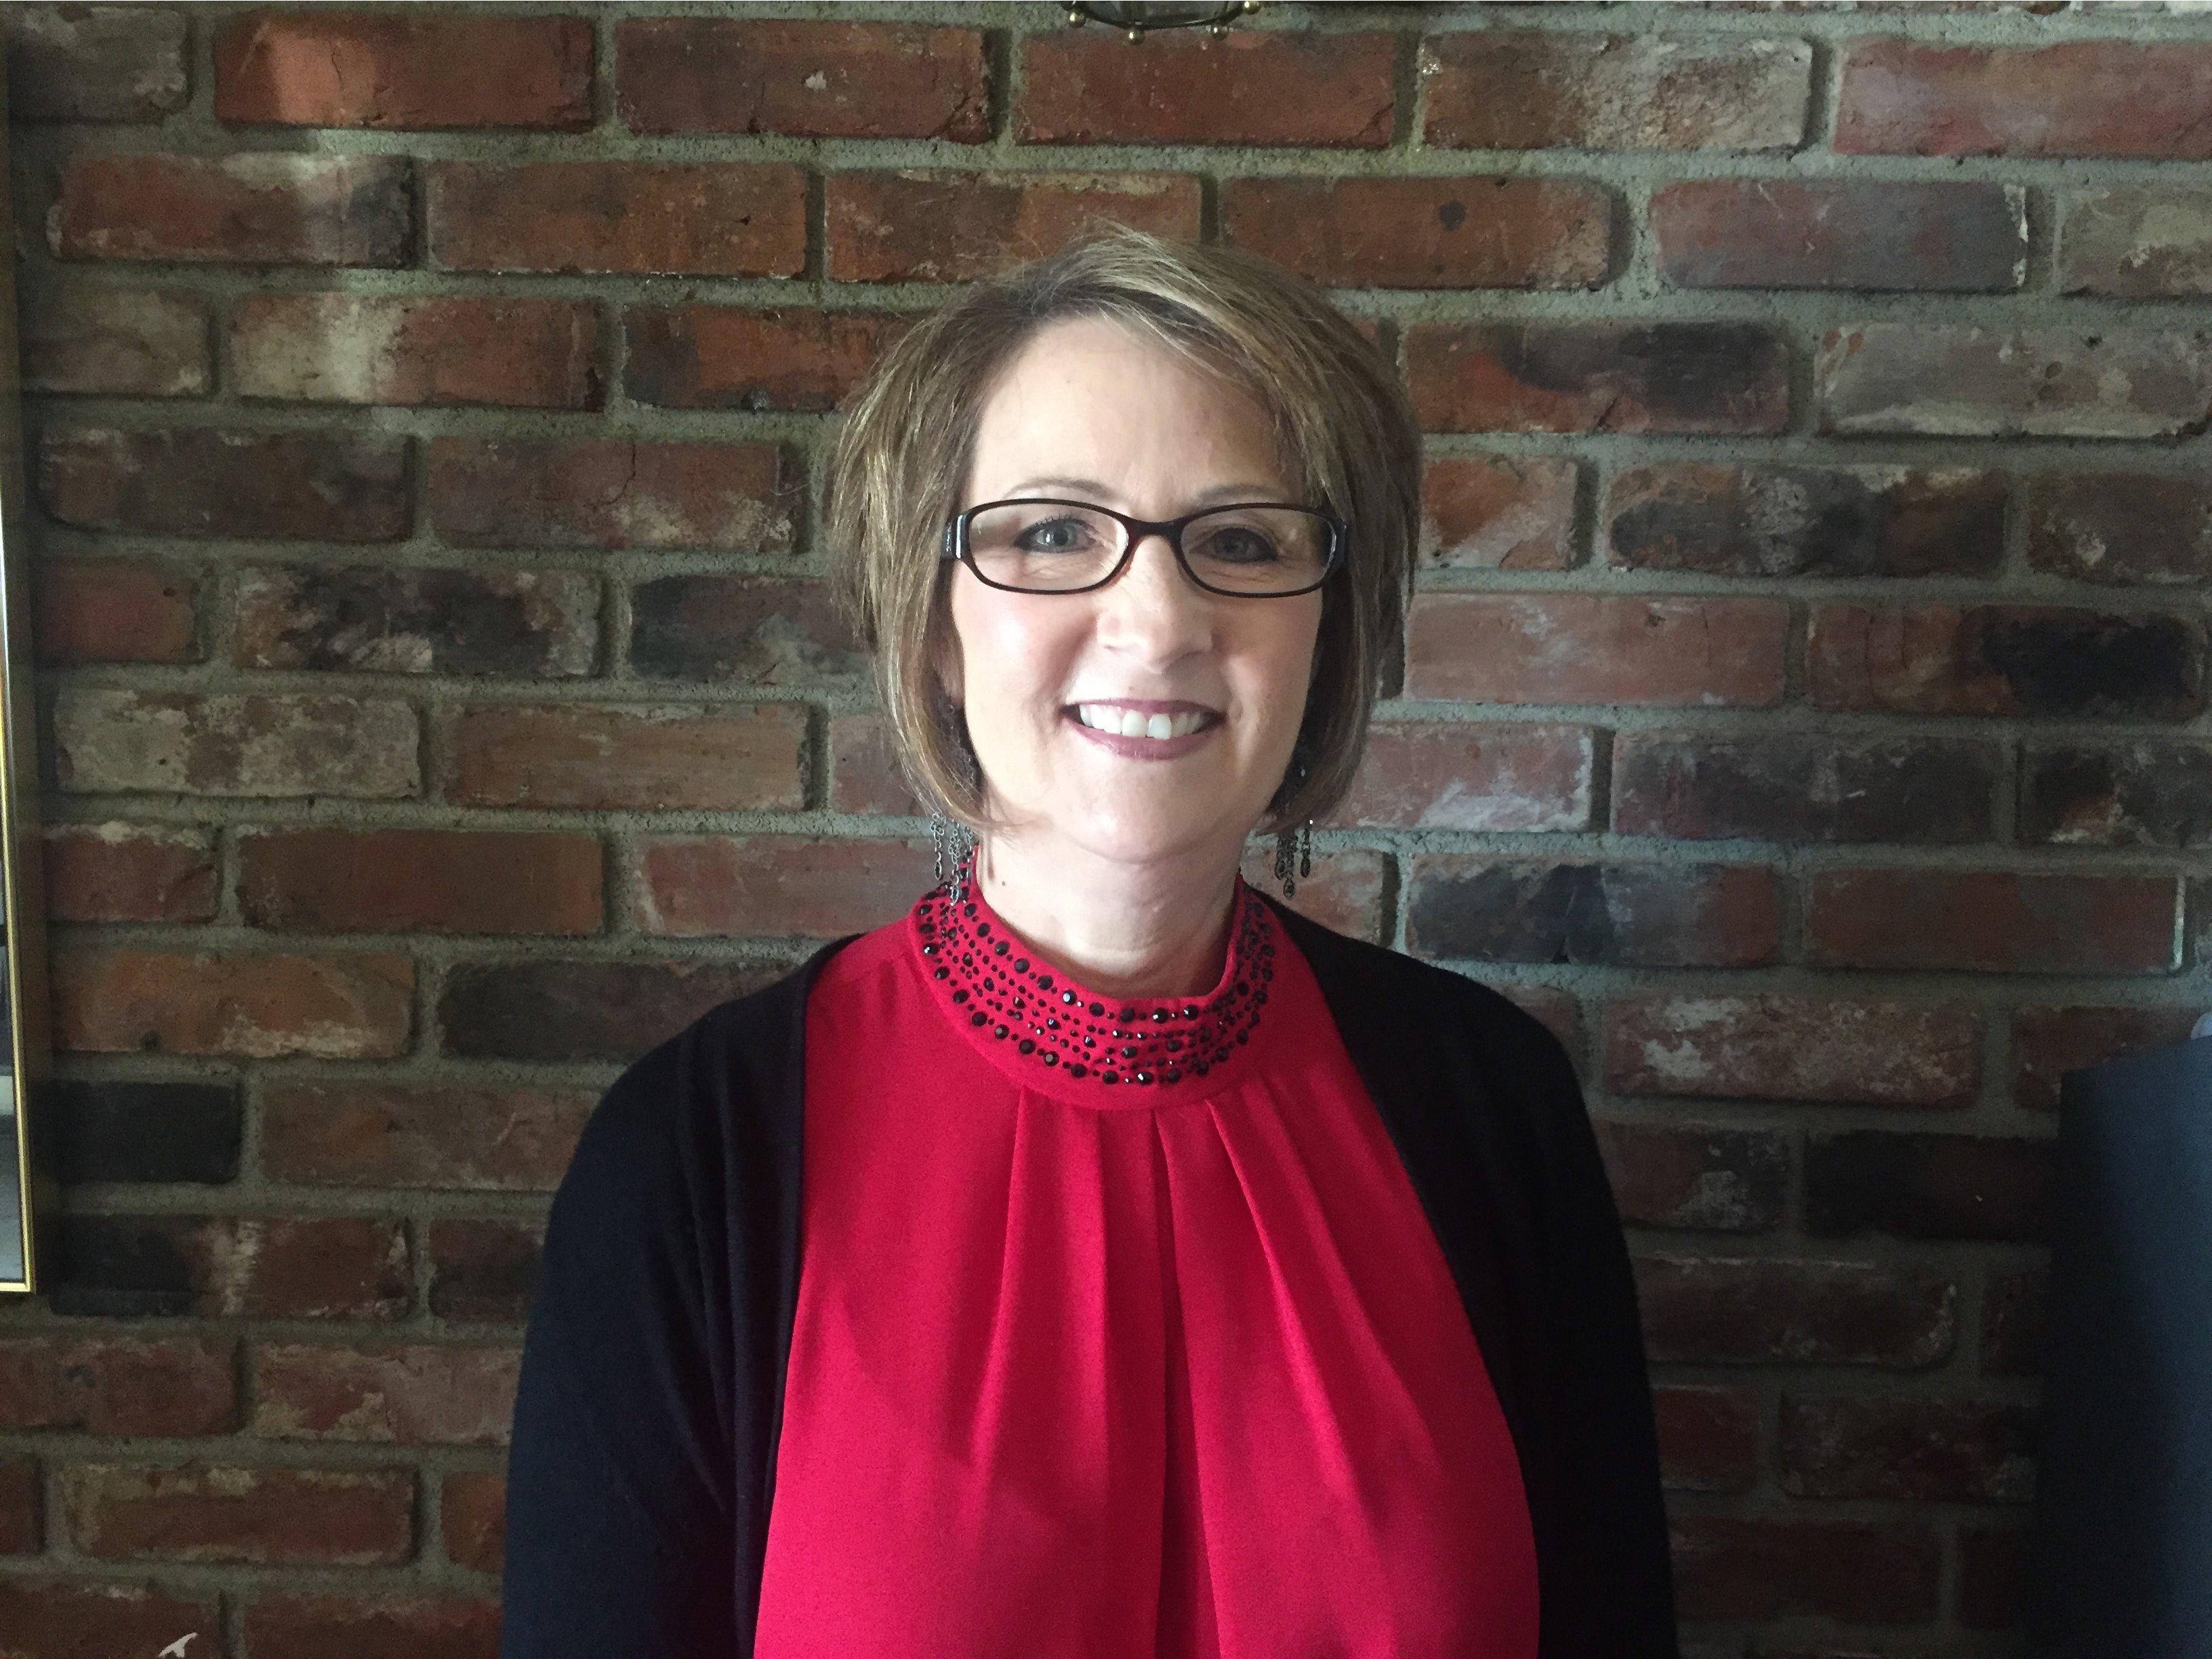 Meet the Manager:
Sharon Cribb
Branch Operations Coordinator